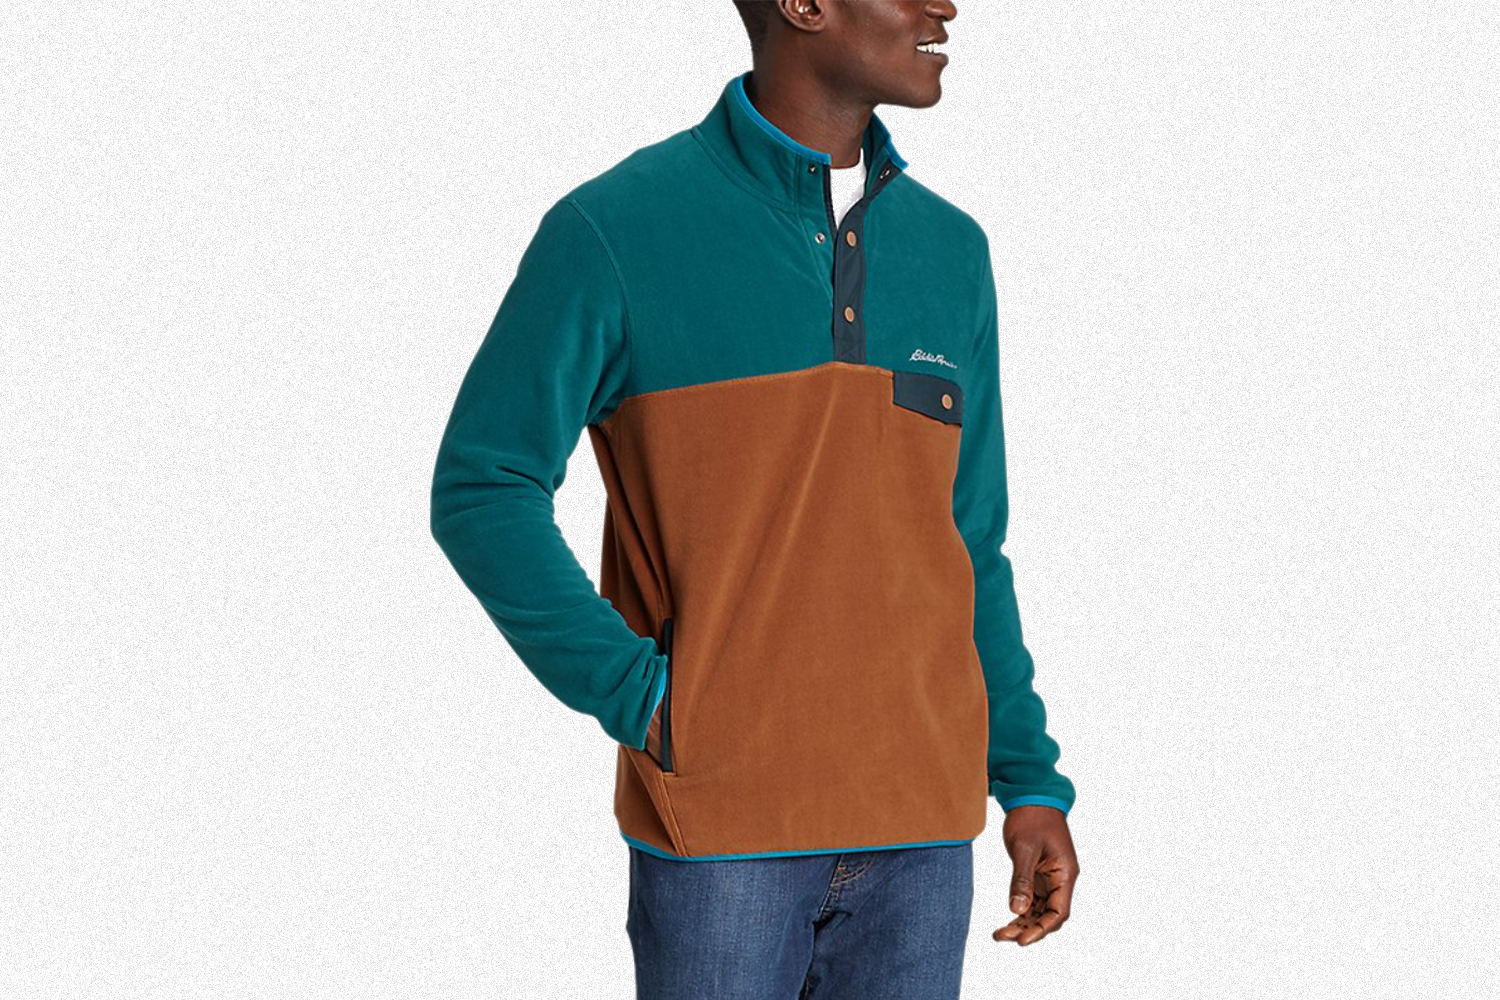 Shop Cold-Weather Layering Pieces on Sale at Eddie Bauer - InsideHook